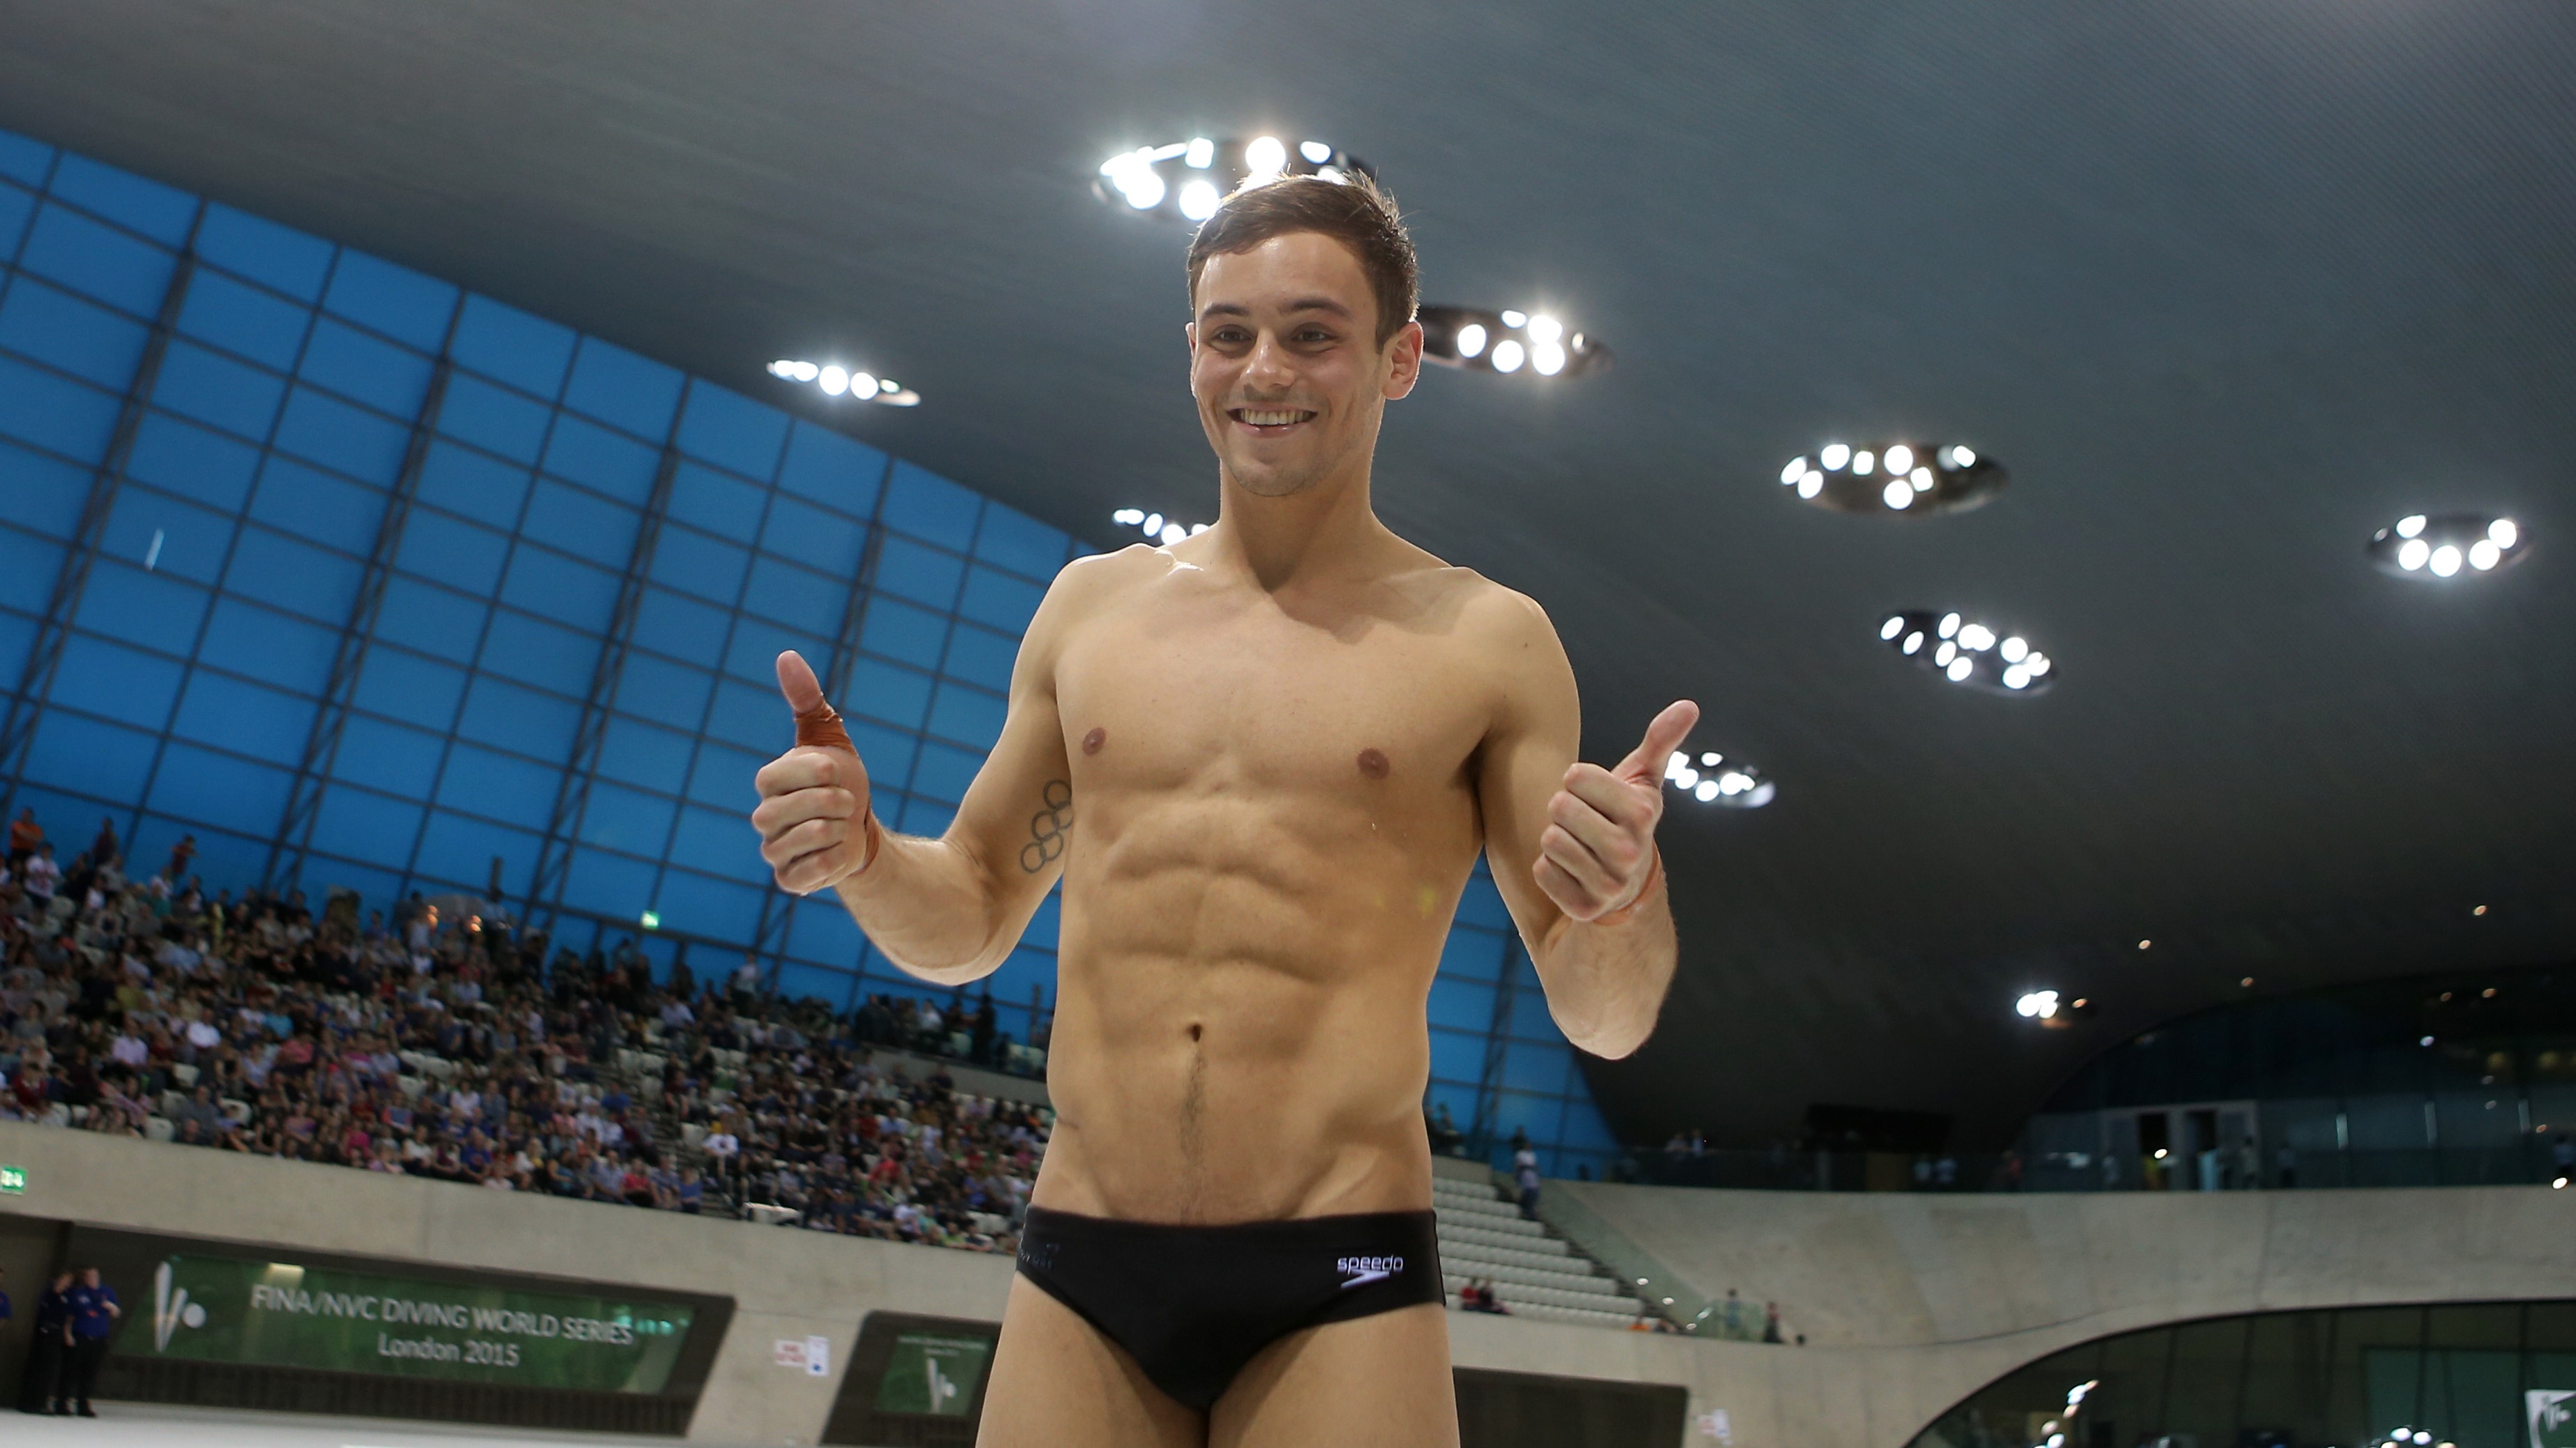 Plymouth's Tom Daley wins team gold in Russia